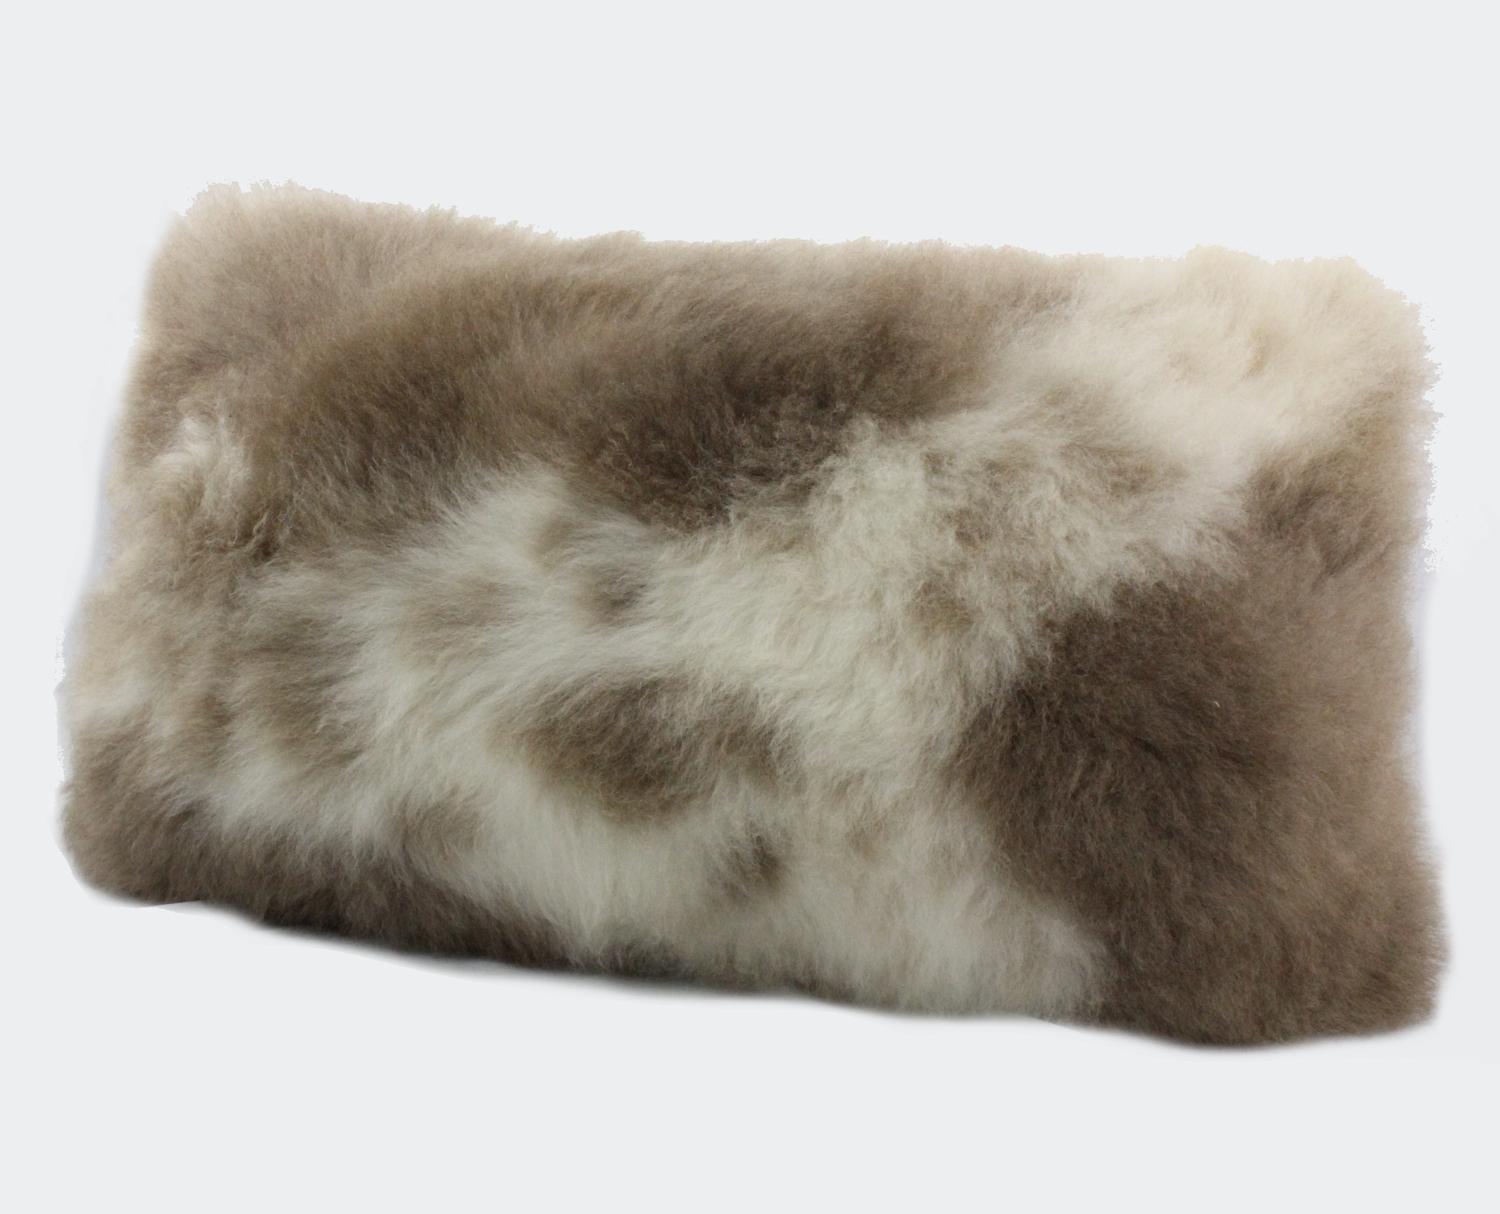 Create an atmosphere of luxurious comfort layering a bed or sofa with this alluring Albanian sheepskin pillow. A Limited edition piece with only one of its kind and never will there be another one like it. Hand-crafted from the finest Albanian